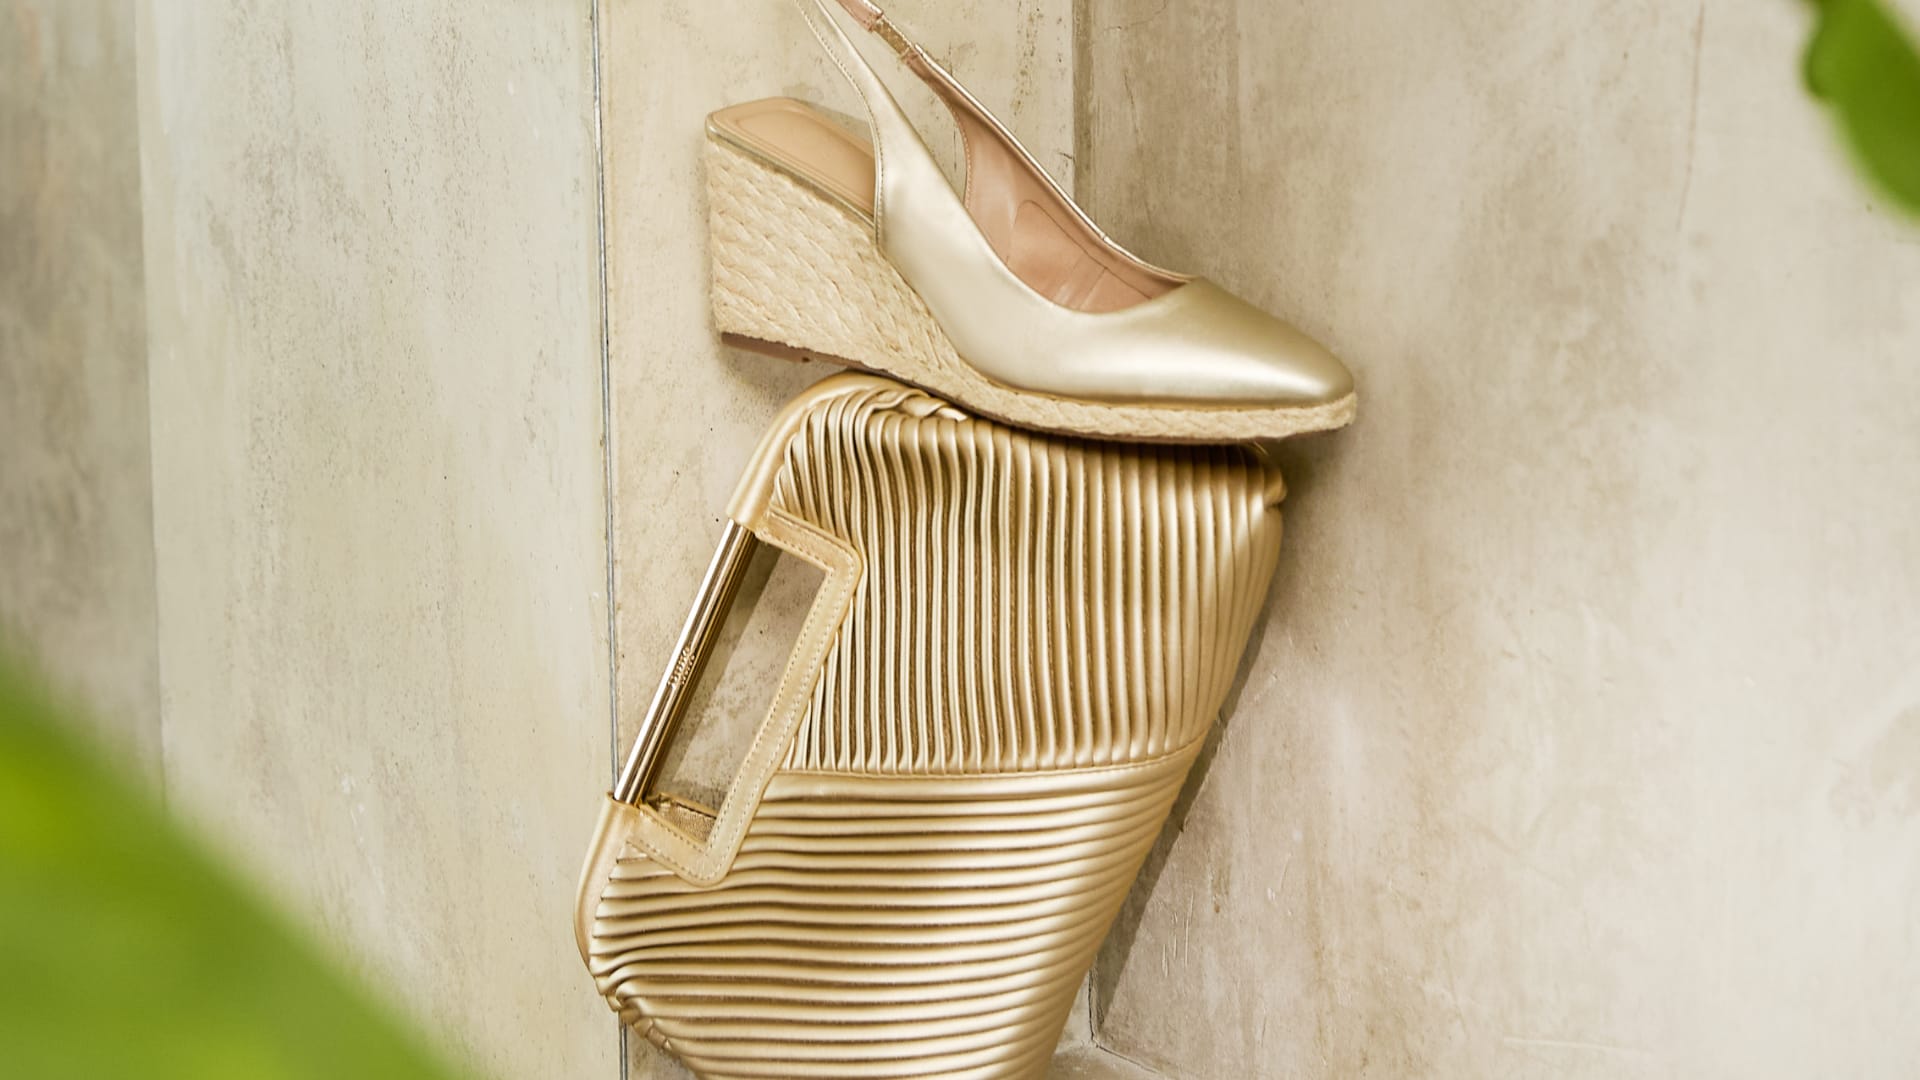 Women's wedge espadrille heel in gold leather with pleated gold clutch bag